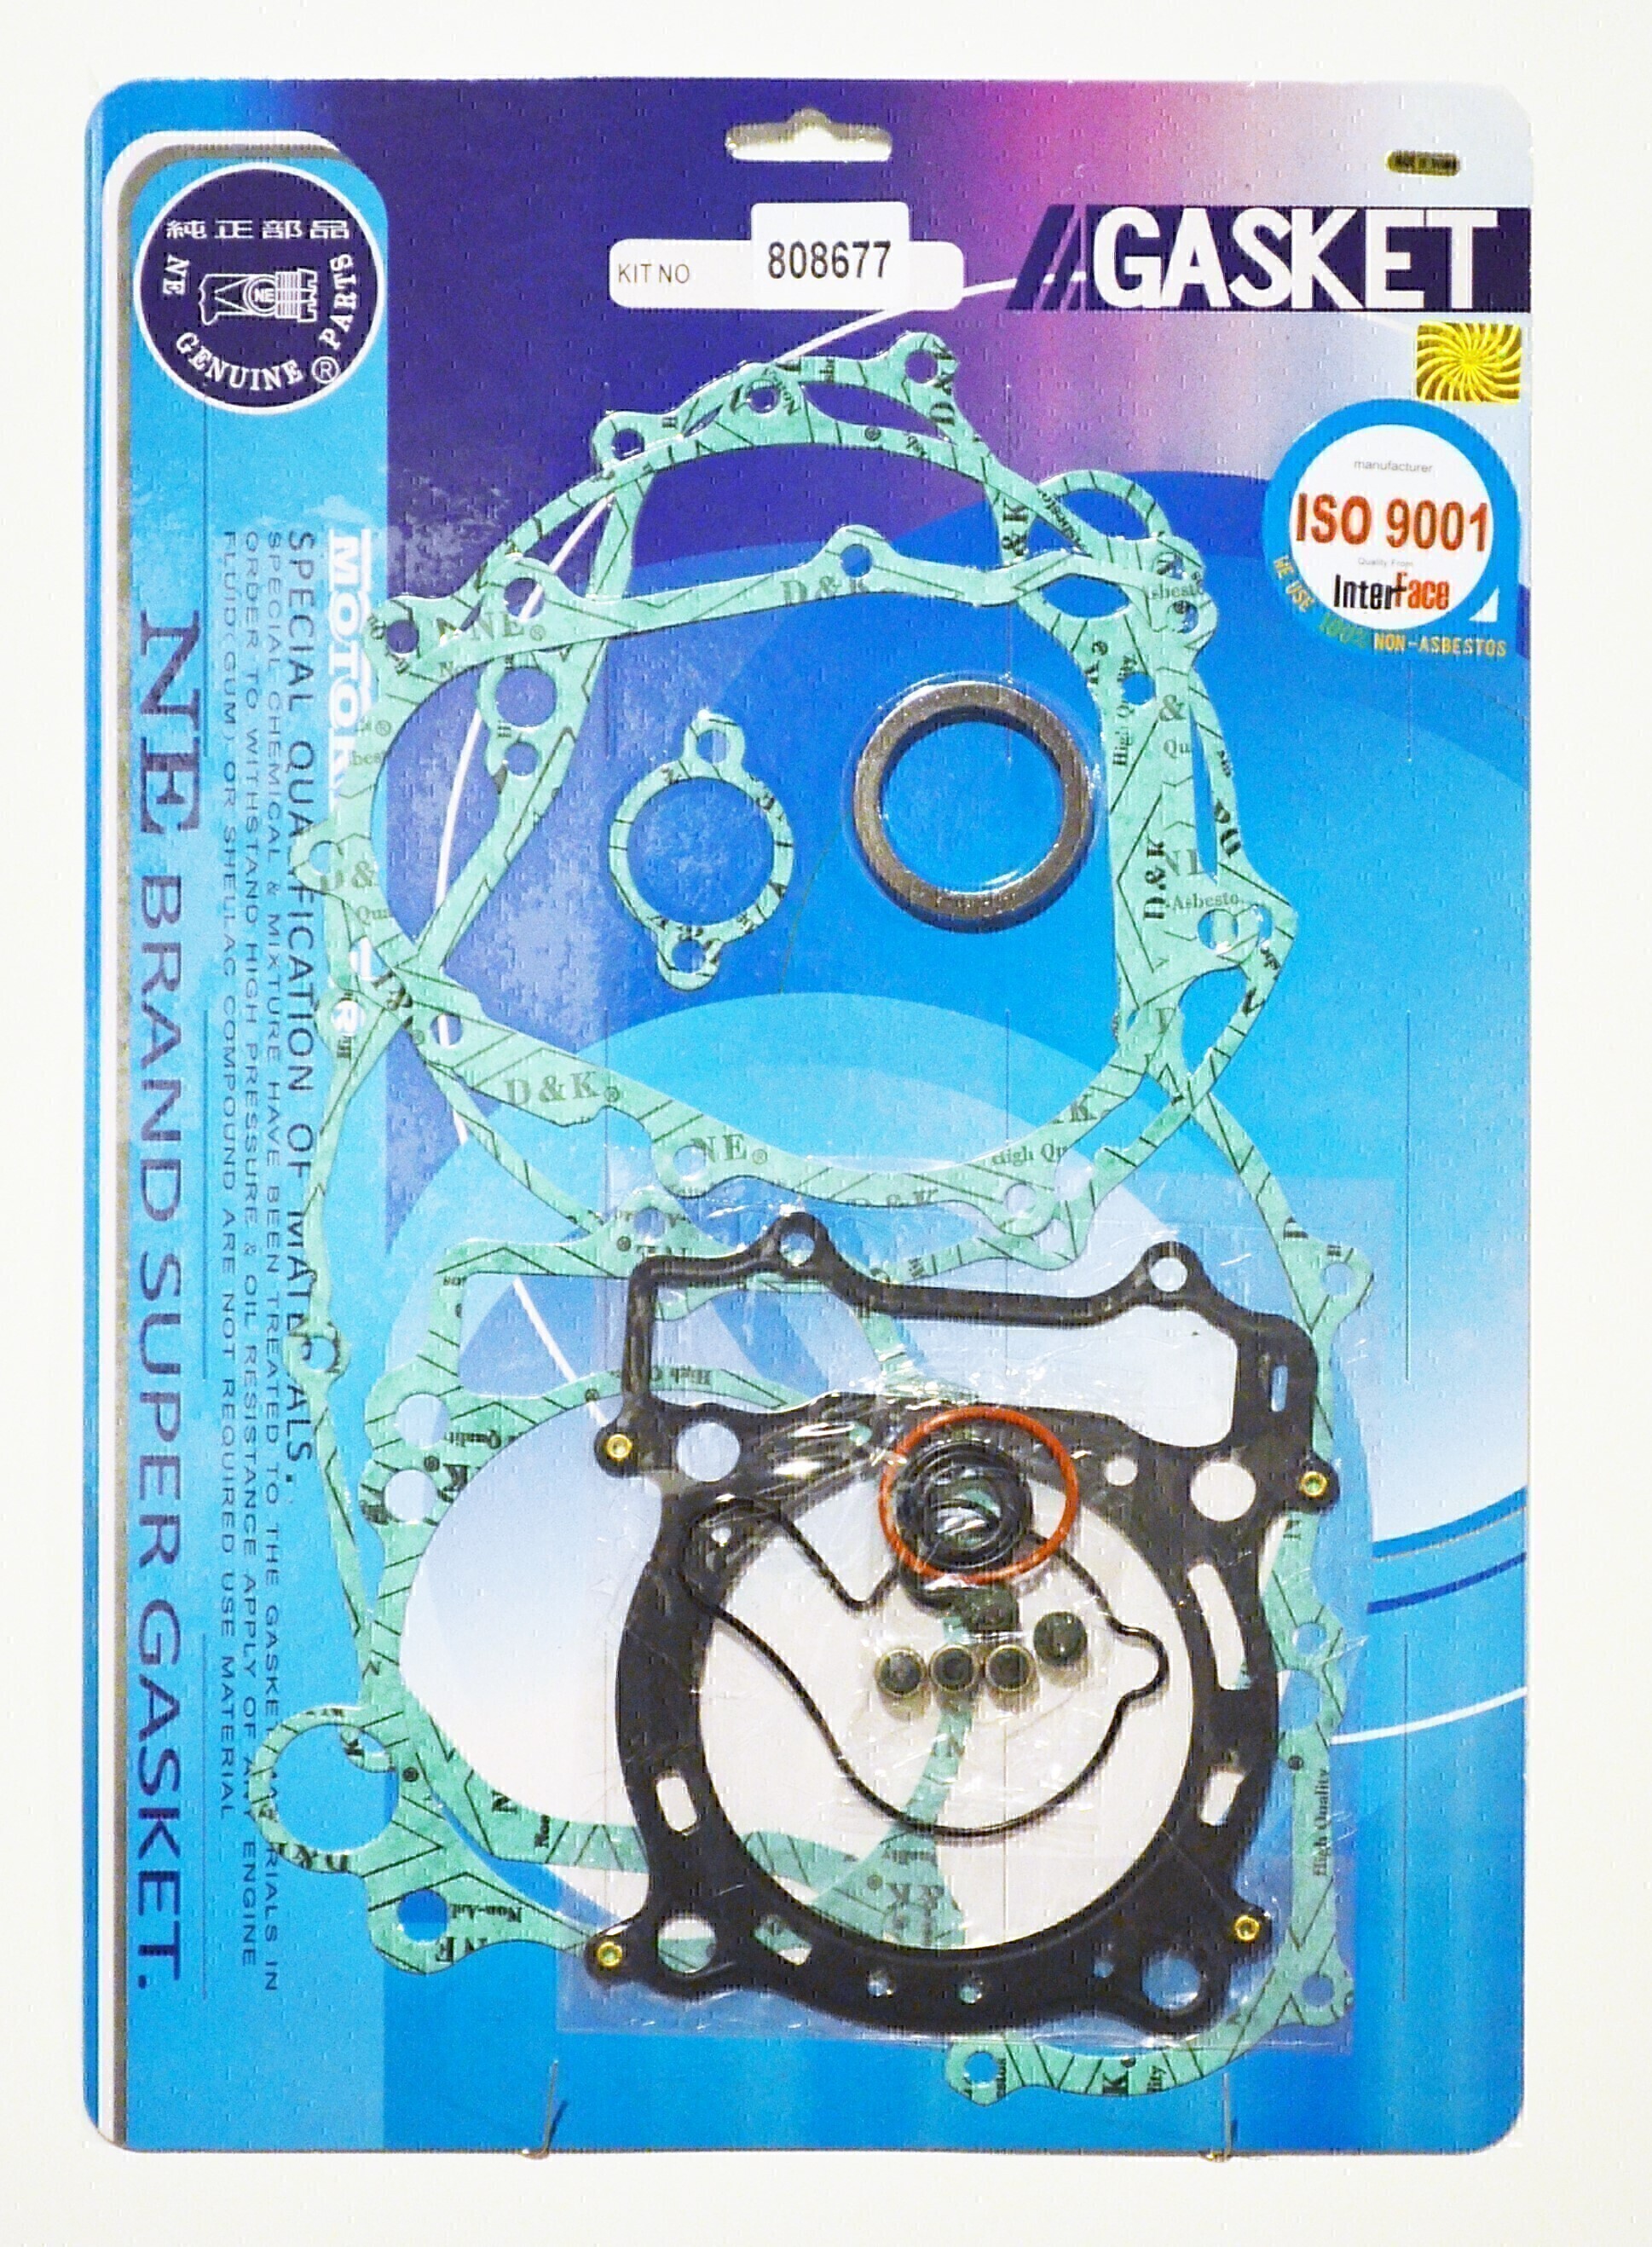 COMPLETE GASKET KIT FOR YAMAHA YZ450F YZ 450F 2003 2004 2005